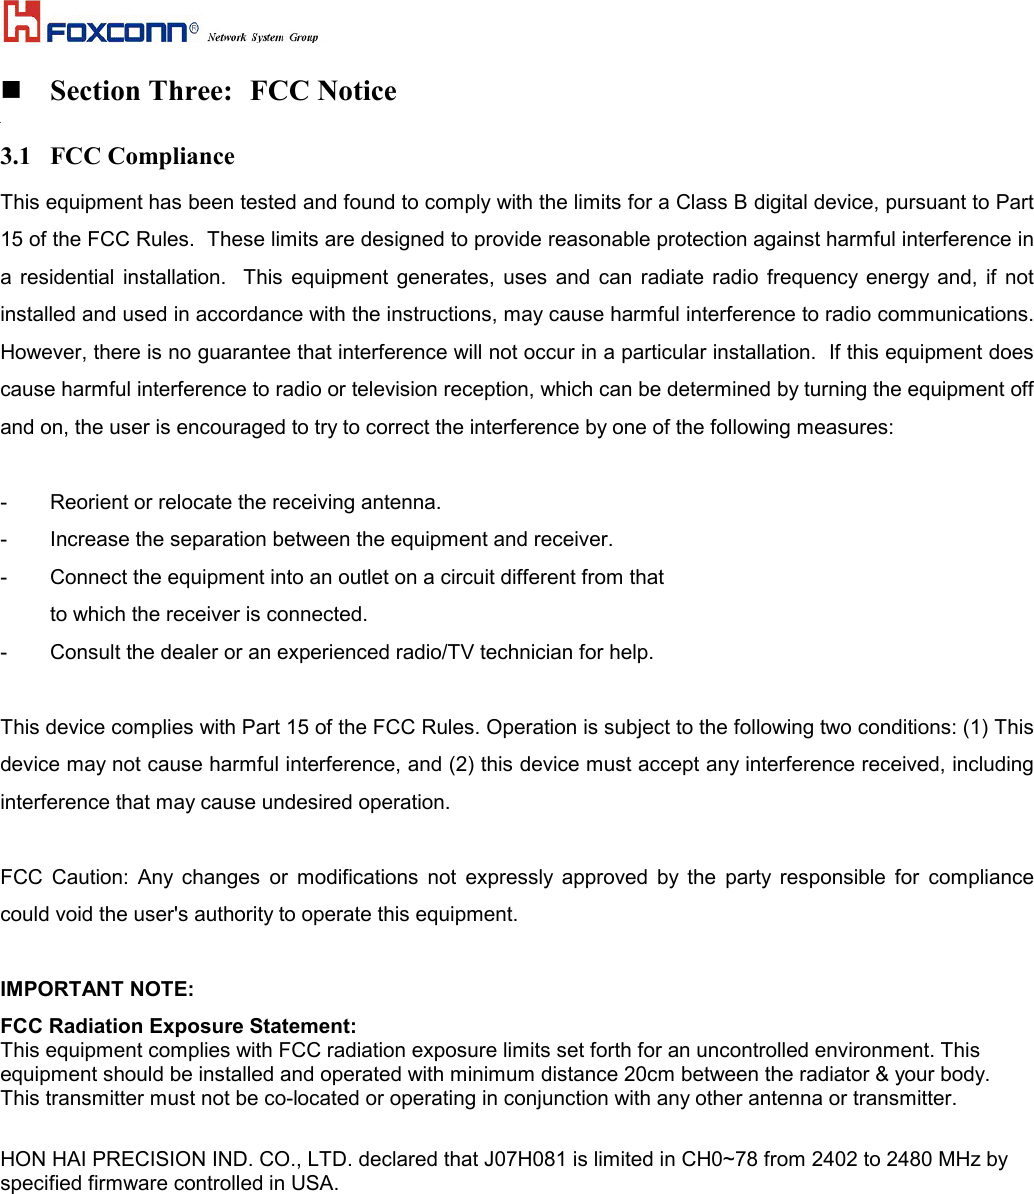  Section Three: FCC Notice3.1 FCC Compliance This equipment has been tested and found to comply with the limits for a Class B digital device, pursuant to Part15 of the FCC Rules.  These limits are designed to provide reasonable protection against harmful interference ina residential installation.  This equipment generates, uses and can radiate radio frequency energy and, if notinstalled and used in accordance with the instructions, may cause harmful interference to radio communications.However, there is no guarantee that interference will not occur in a particular installation.  If this equipment doescause harmful interference to radio or television reception, which can be determined by turning the equipment offand on, the user is encouraged to try to correct the interference by one of the following measures:  - Reorient or relocate the receiving antenna. - Increase the separation between the equipment and receiver. - Connect the equipment into an outlet on a circuit different from that to which the receiver is connected. - Consult the dealer or an experienced radio/TV technician for help.  This device complies with Part 15 of the FCC Rules. Operation is subject to the following two conditions: (1) Thisdevice may not cause harmful interference, and (2) this device must accept any interference received, includinginterference that may cause undesired operation.  FCC Caution: Any changes or modifications not expressly approved by the party responsible for compliancecould void the user&apos;s authority to operate this equipment.  IMPORTANT NOTE: FCC Radiation Exposure Statement:This equipment complies with FCC radiation exposure limits set forth for an uncontrolled environment. Thisequipment should be installed and operated with minimum distance 20cm between the radiator &amp; your body.This transmitter must not be co-located or operating in conjunction with any other antenna or transmitter. HON HAI PRECISION IND. CO., LTD. declared that J07H081 is limited in CH0~78 from 2402 to 2480 MHz byspecified firmware controlled in USA.